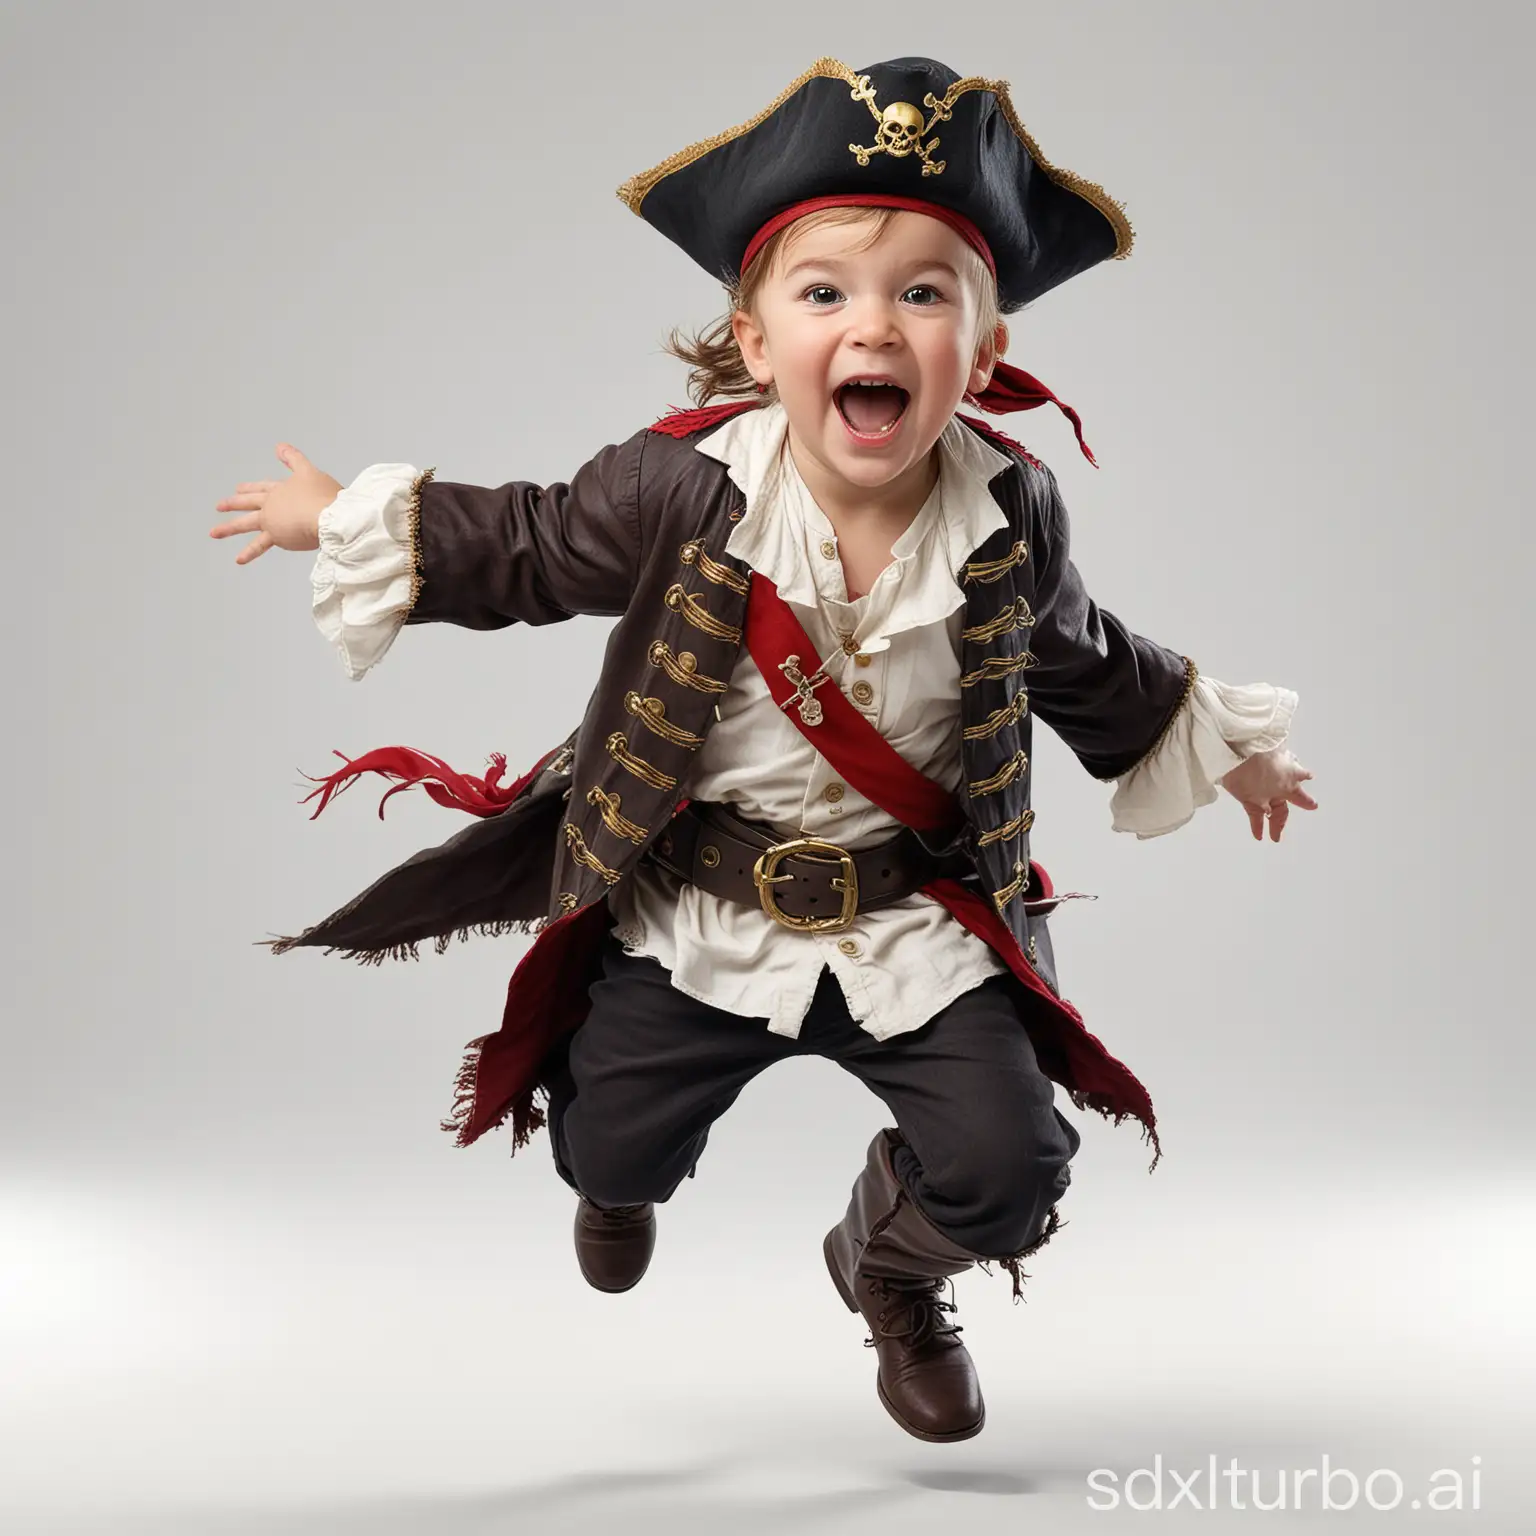 Excited-Pirate-Kid-Jumping-in-High-Resolution